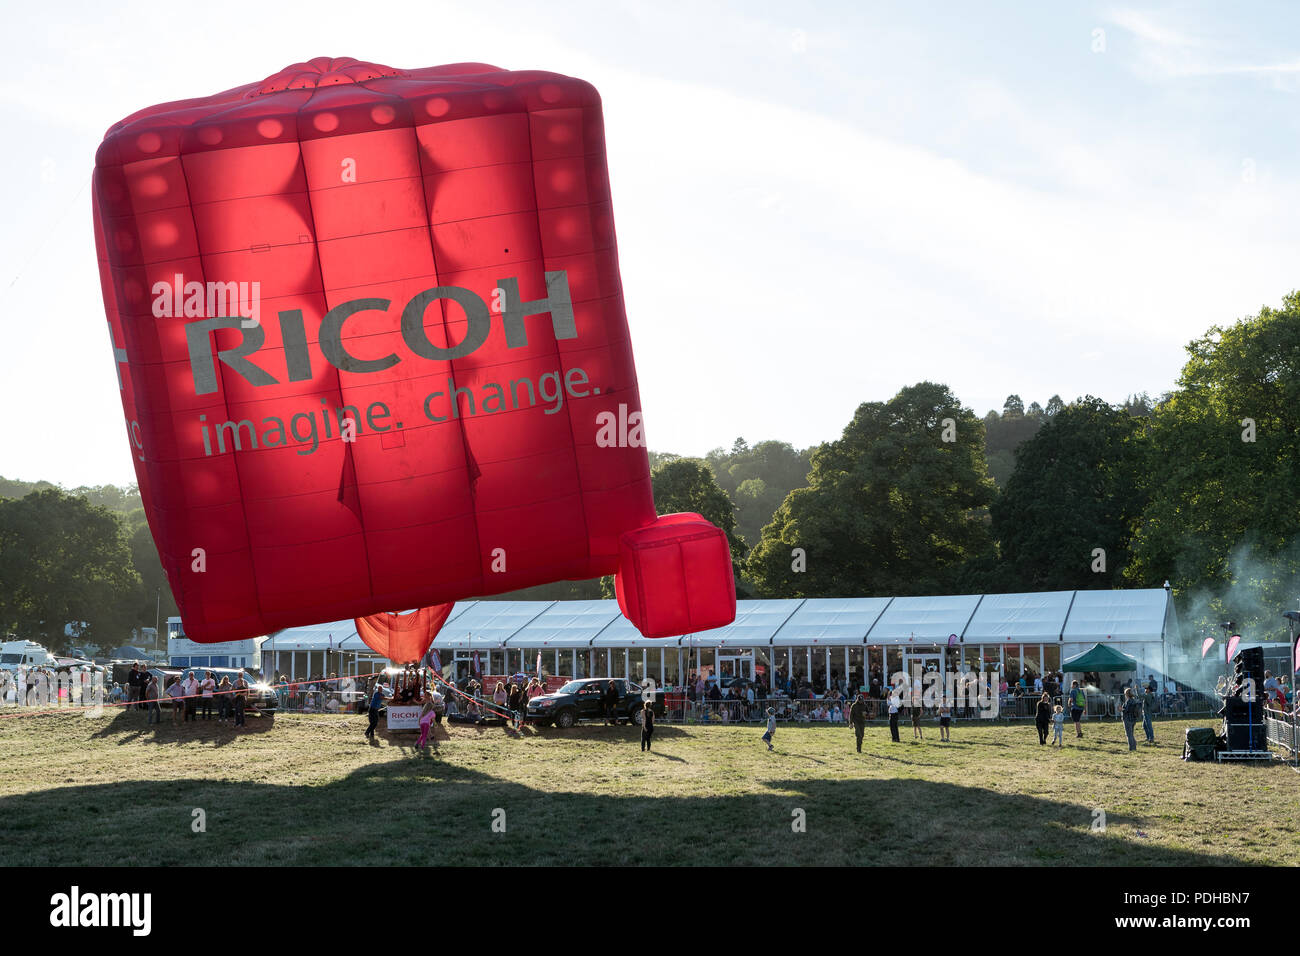 Ashton Court, Bristol, UK. 09 August 2018. Despite large crowds gathering in the sun at Ashton Court for the Special Shaped Balloon launch, the winds proved to be too strong to permit the balloons to fly safely. Organisers are hoping for better flying condition on Friday morning’s first mass launch celebrating 40 years of the fiesta.  Neil Cordell/Alamy Live News Stock Photo